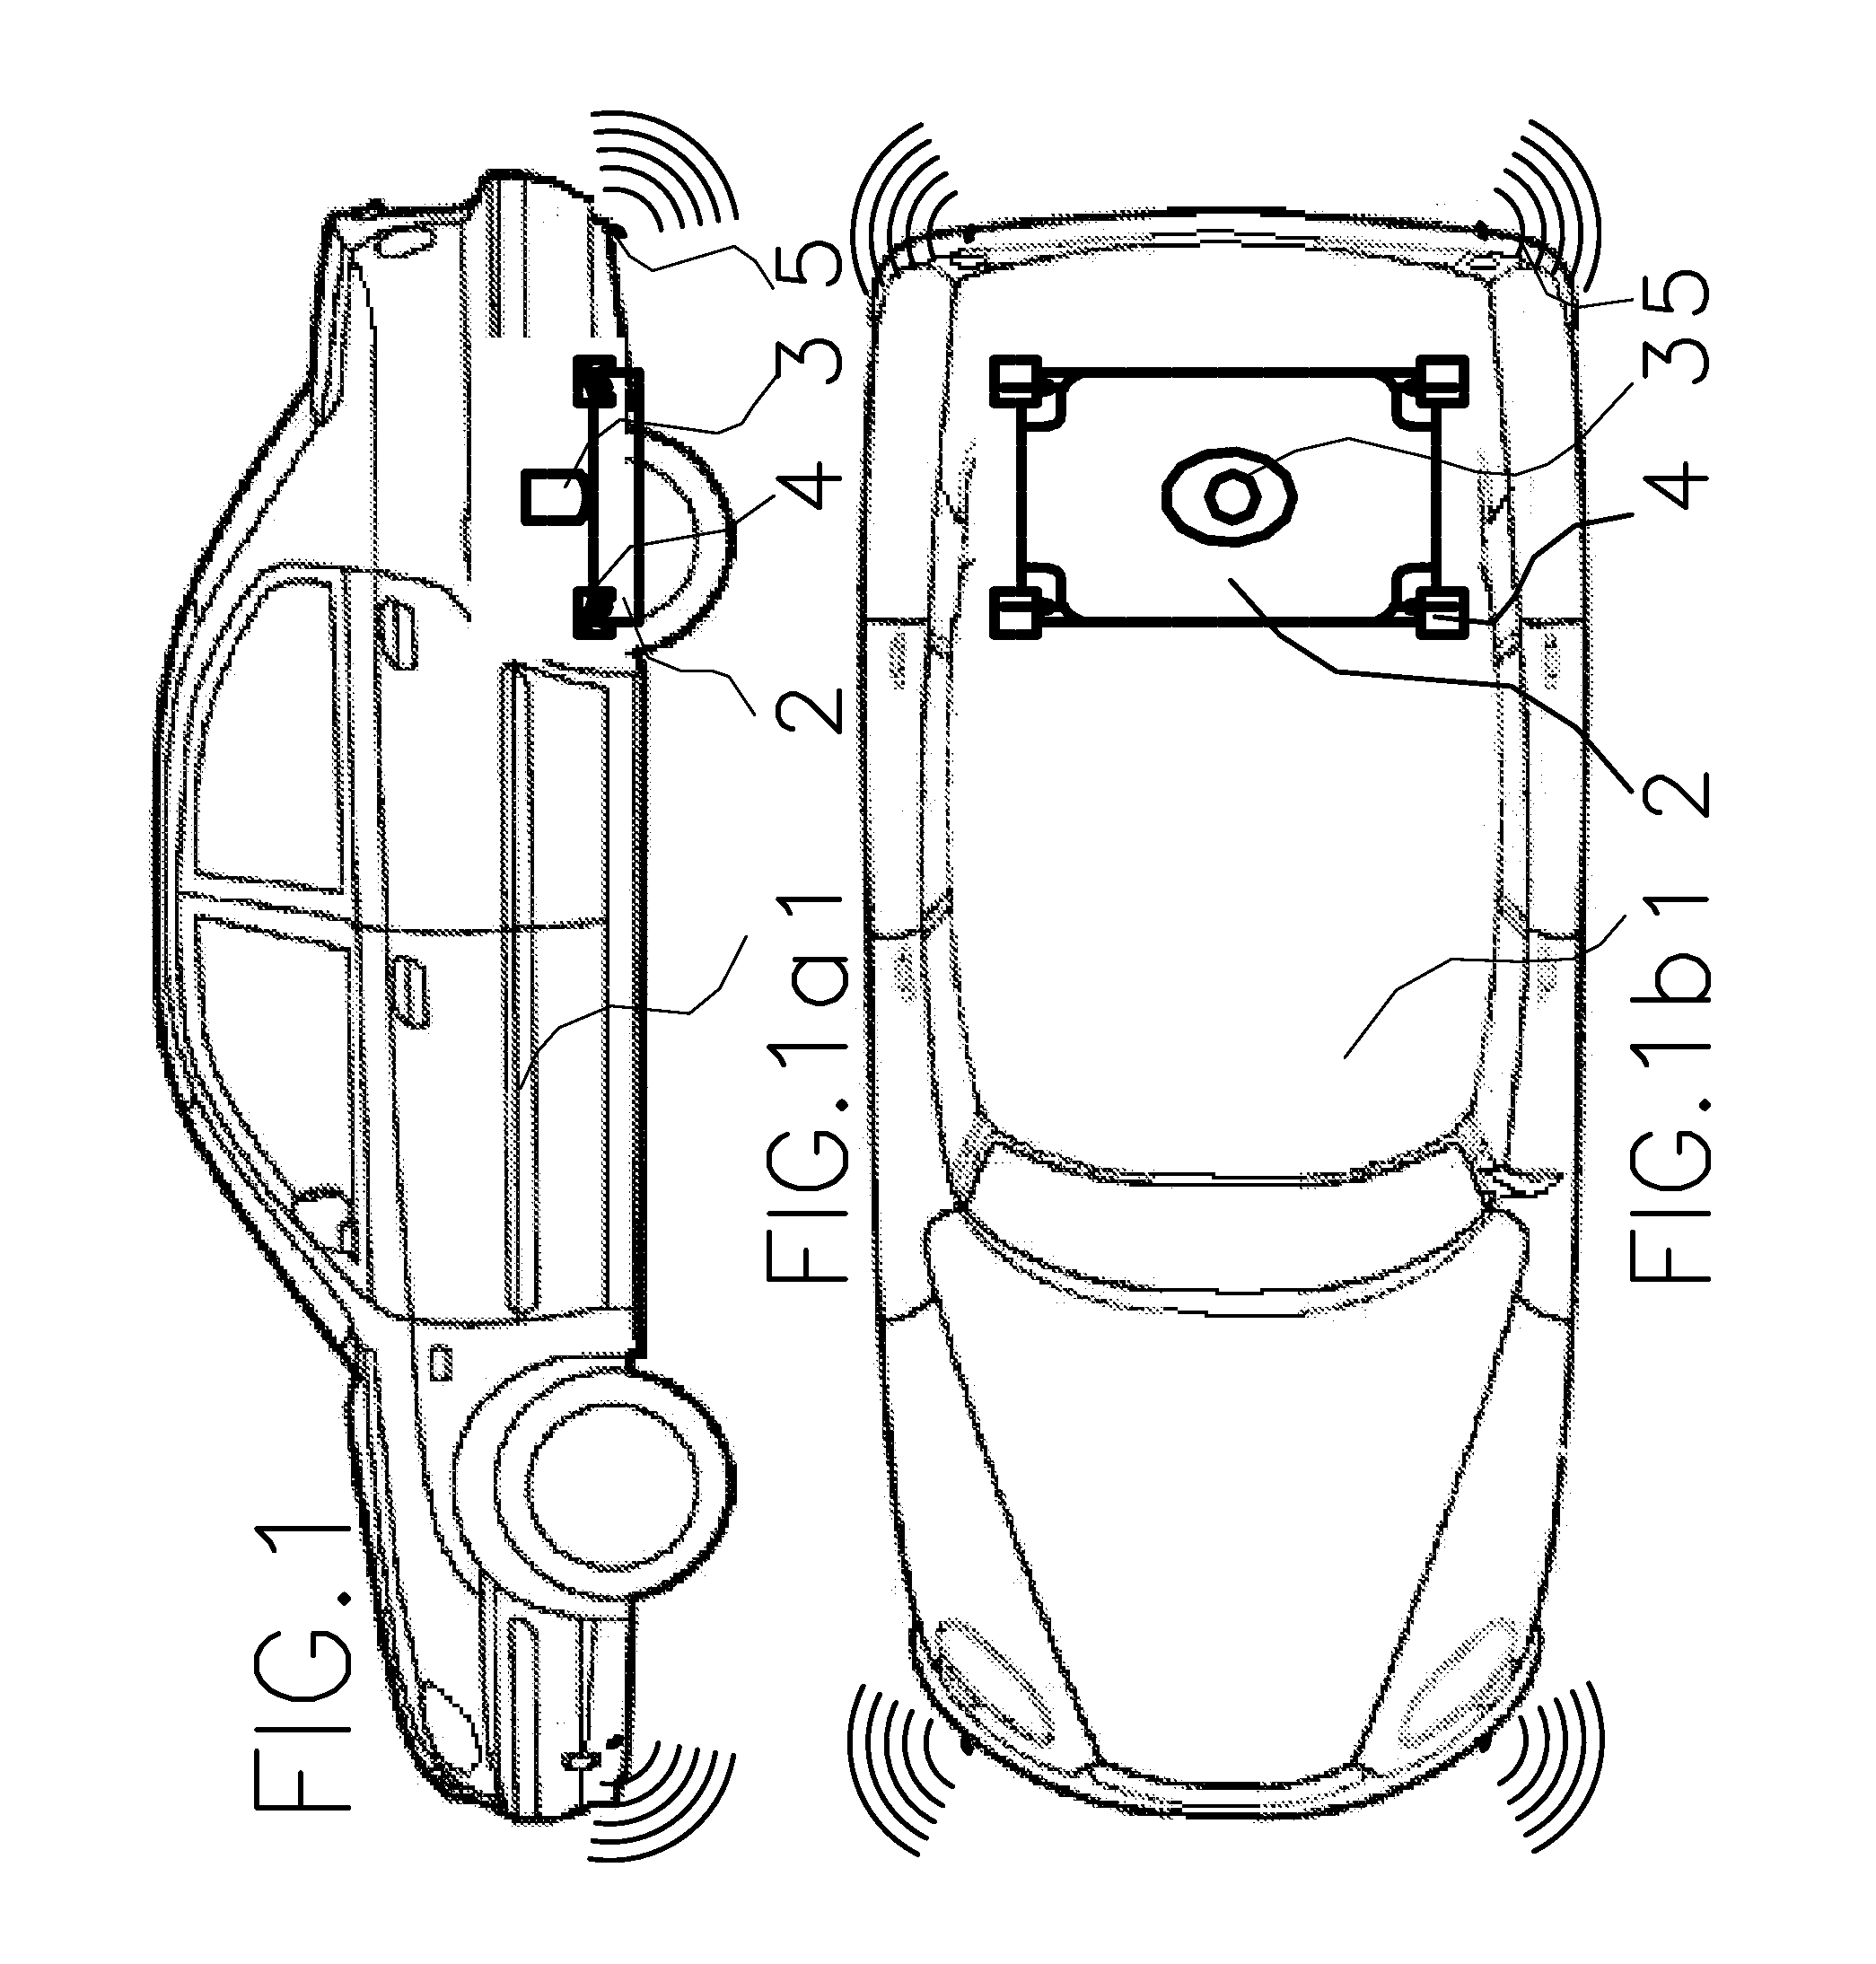 Automatic system for quick dropping of the battery, integrated to an electrical or hybrid vehicle, and consequences on its maximum loading weight